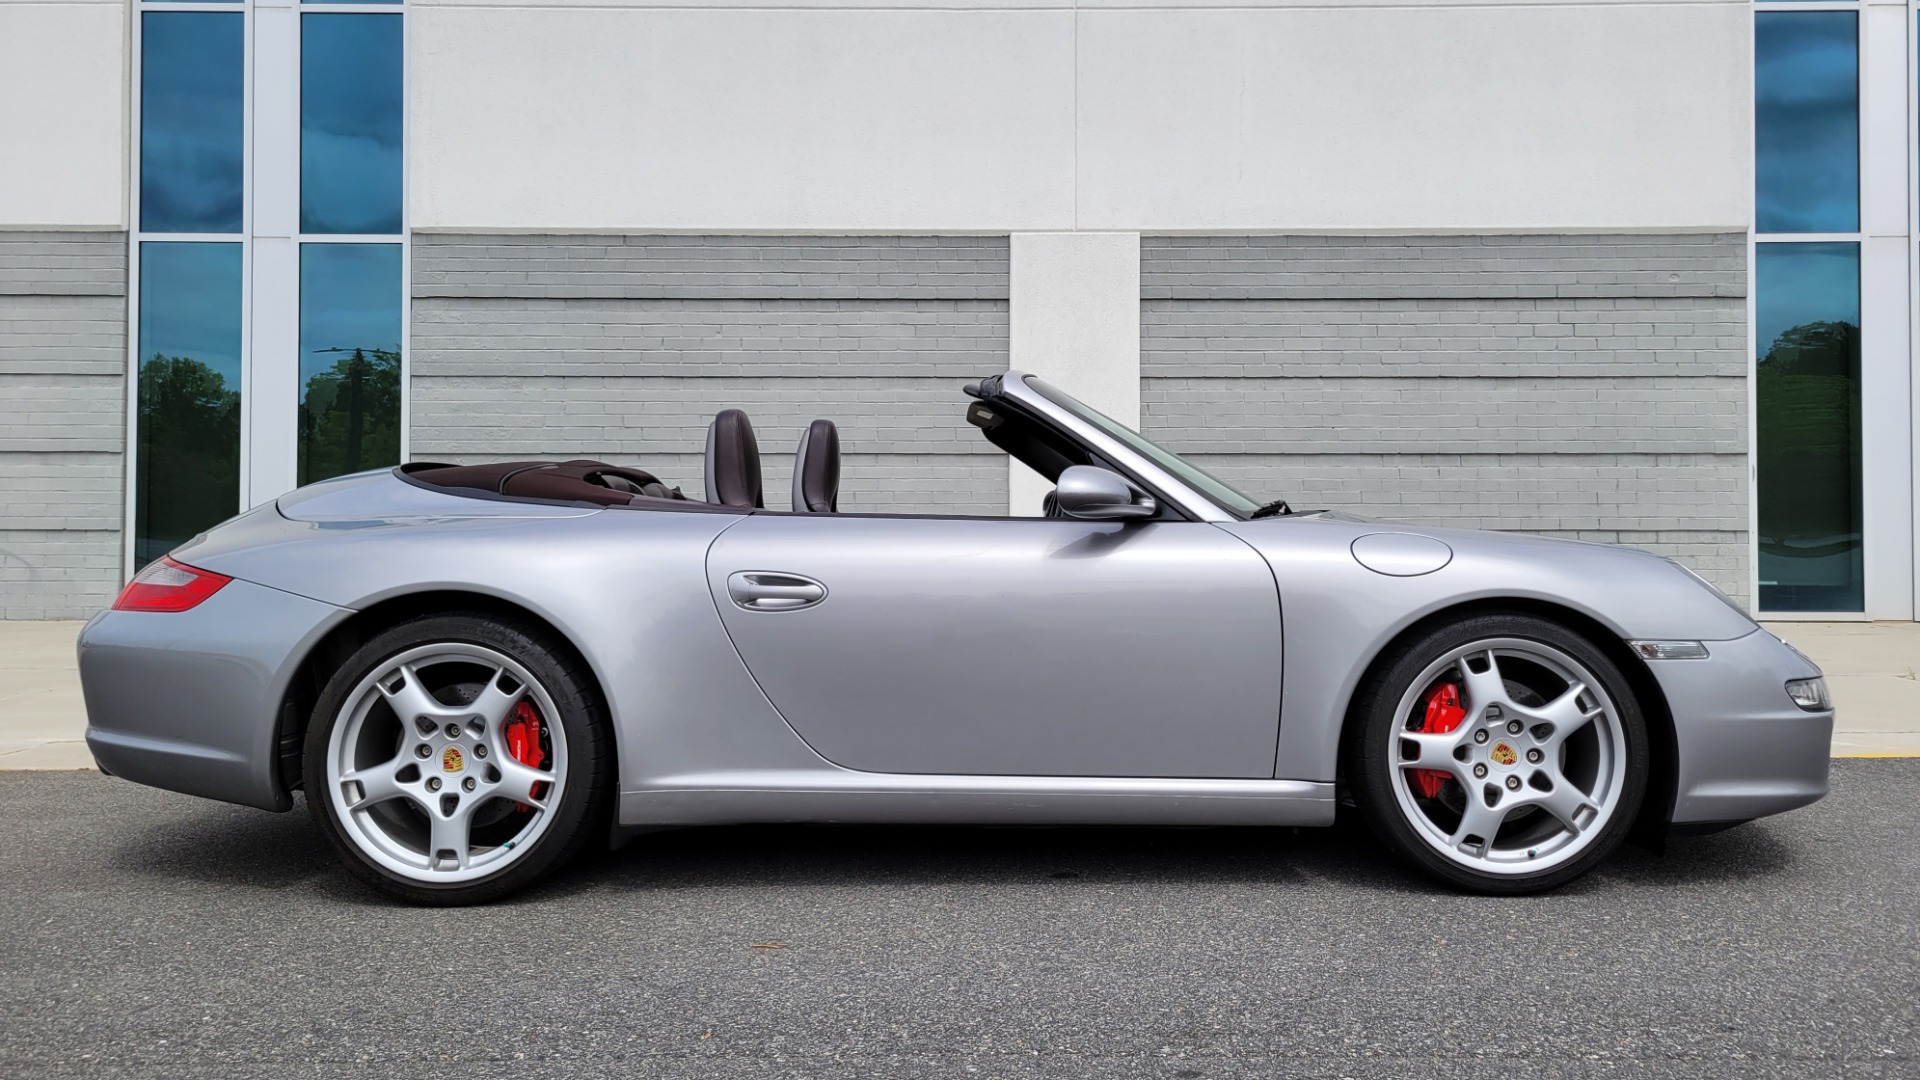 Used 2006 Porsche 911 CARRERA S CABRIOLET / SPORT CHRONO / BOSE / SPORT SEATS / SPORT SHIFTER for sale $62,999 at Formula Imports in Charlotte NC 28227 5